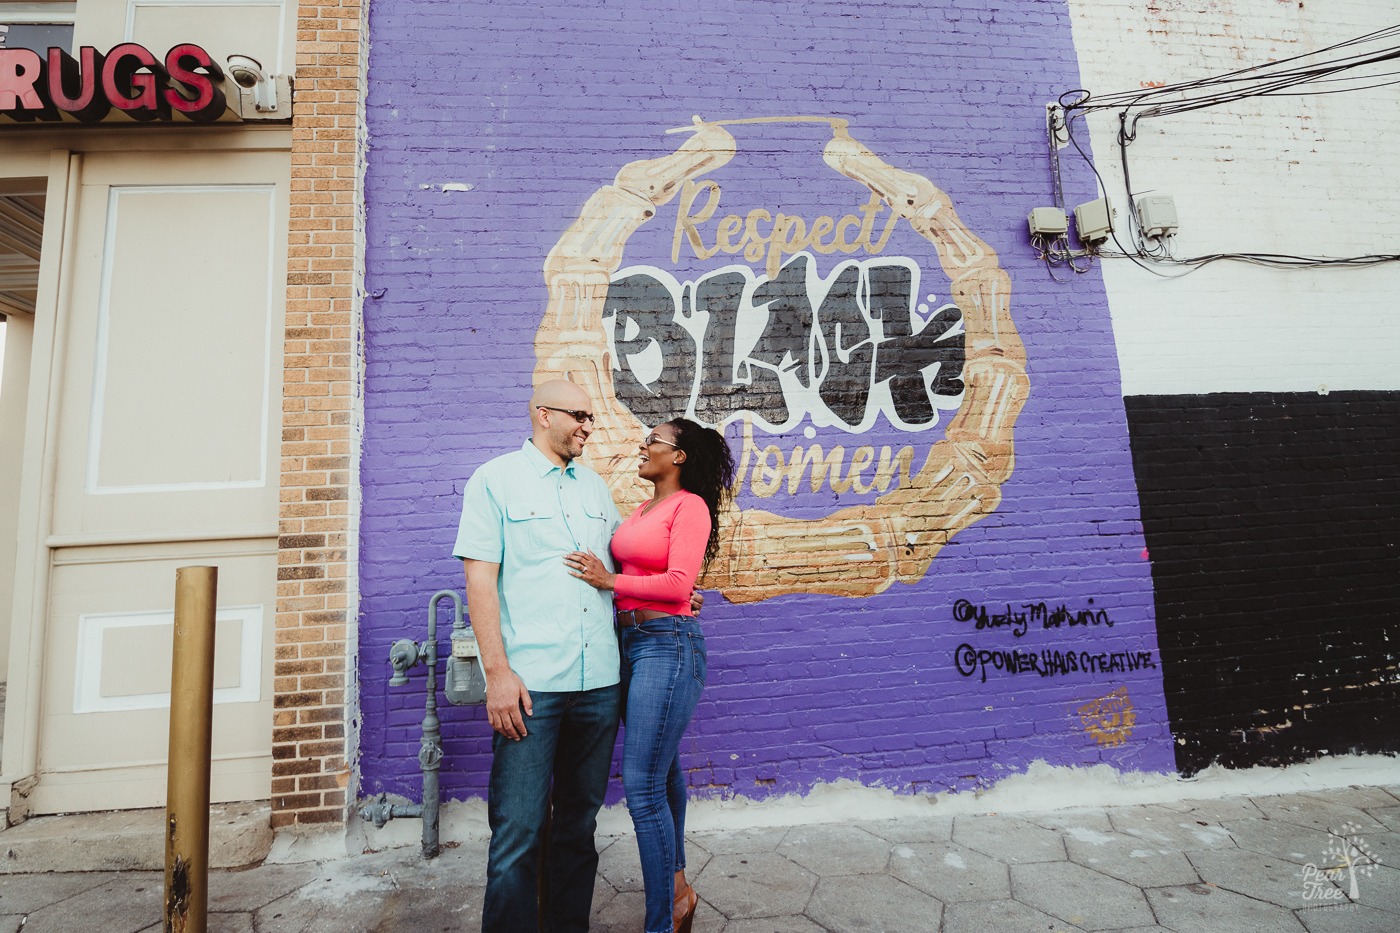 African American couple wearing jeans and sunglasses, having a good time in front of Atlanta mural that says Respect BLACK Women.